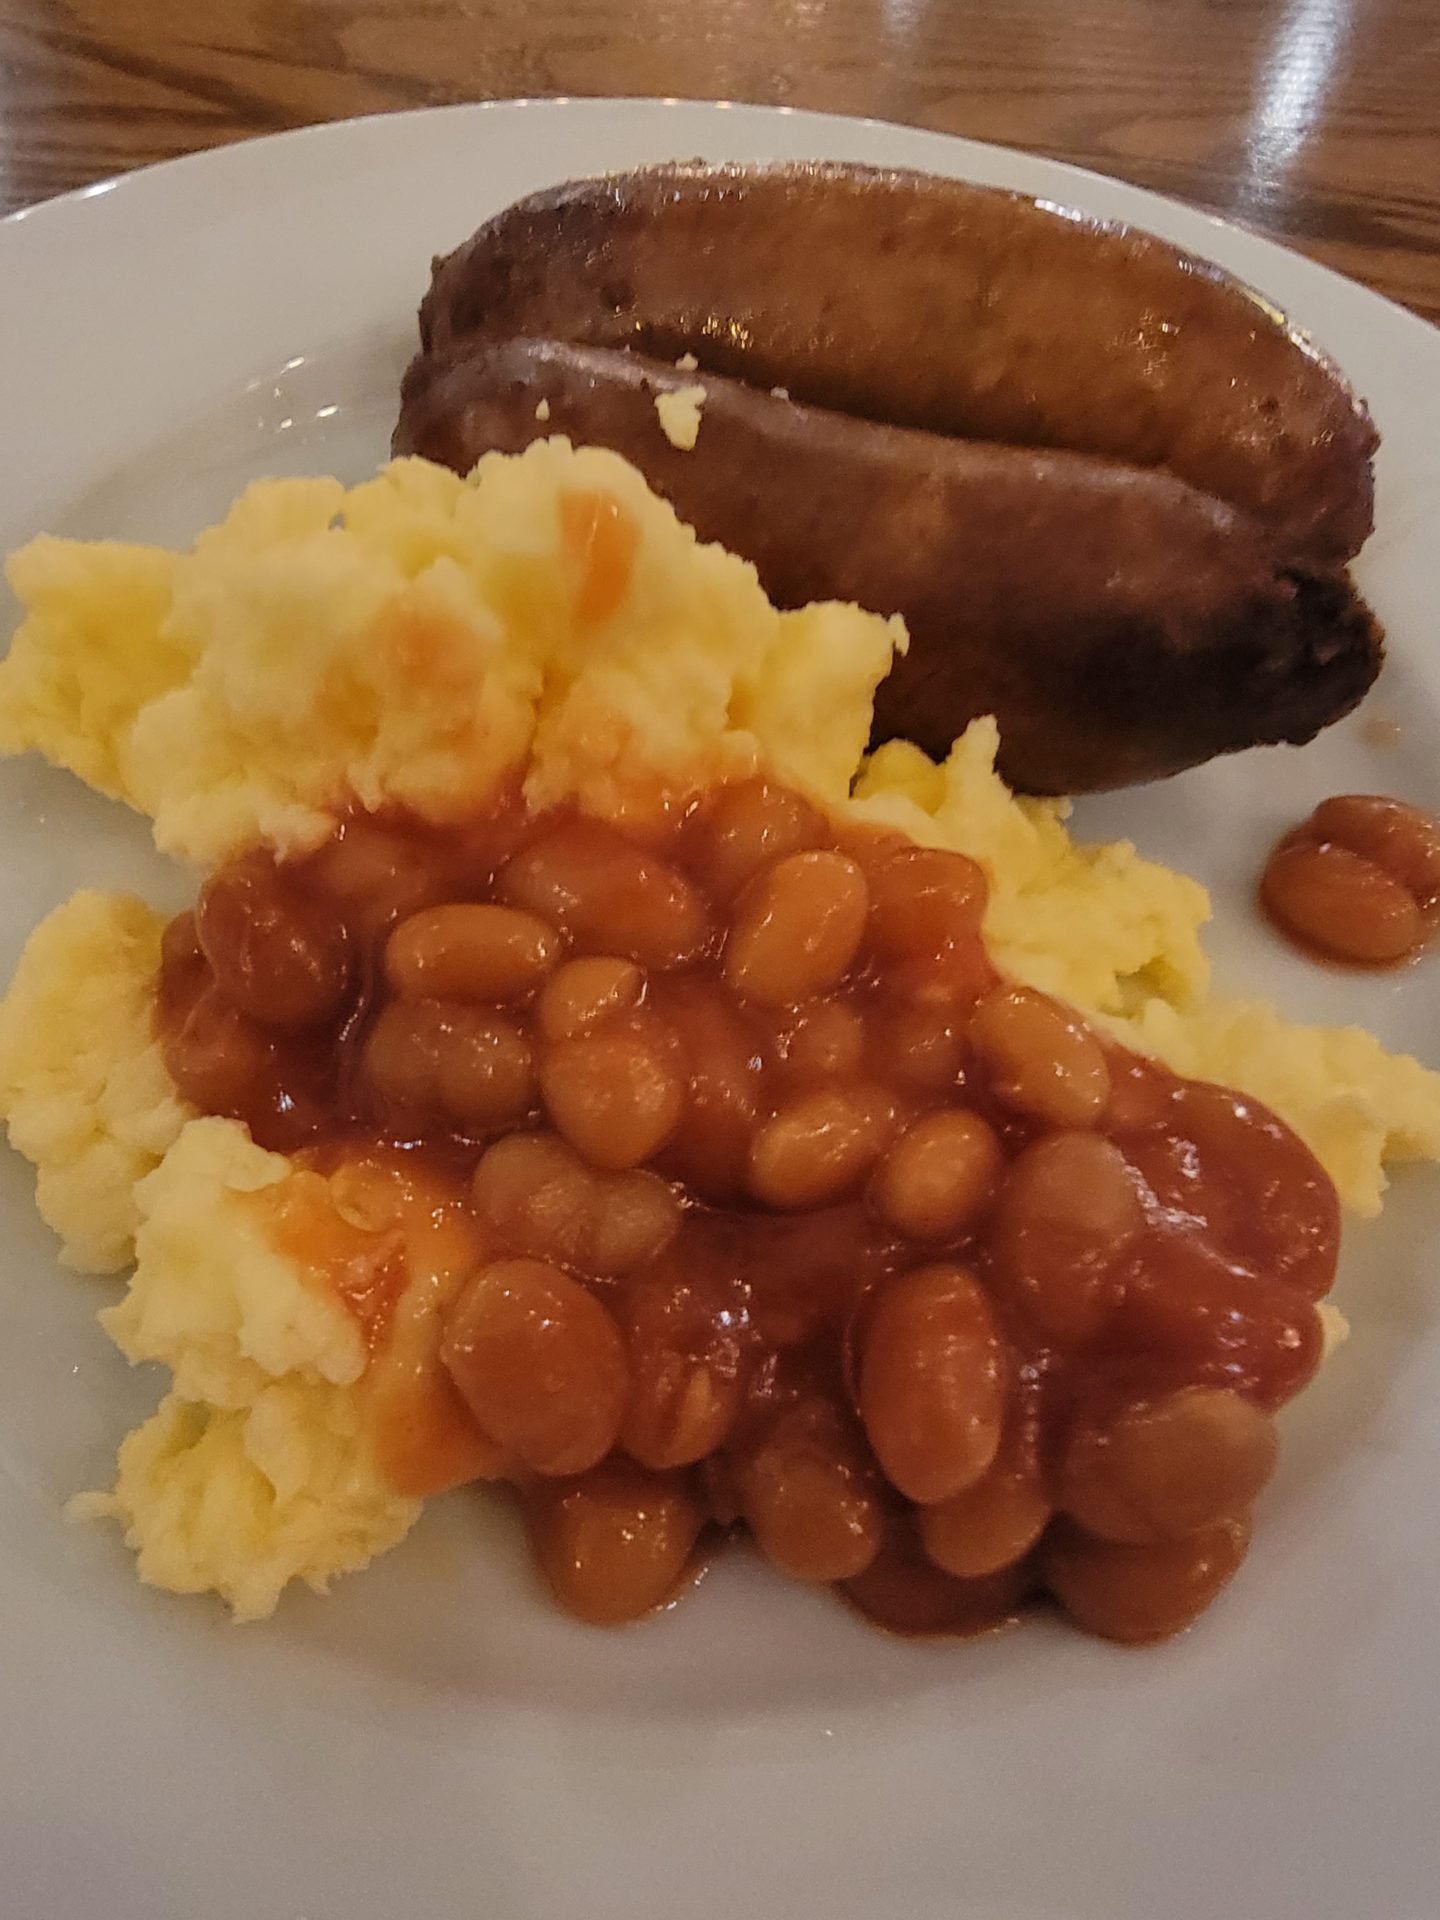 a plate of food with beans and potatoes